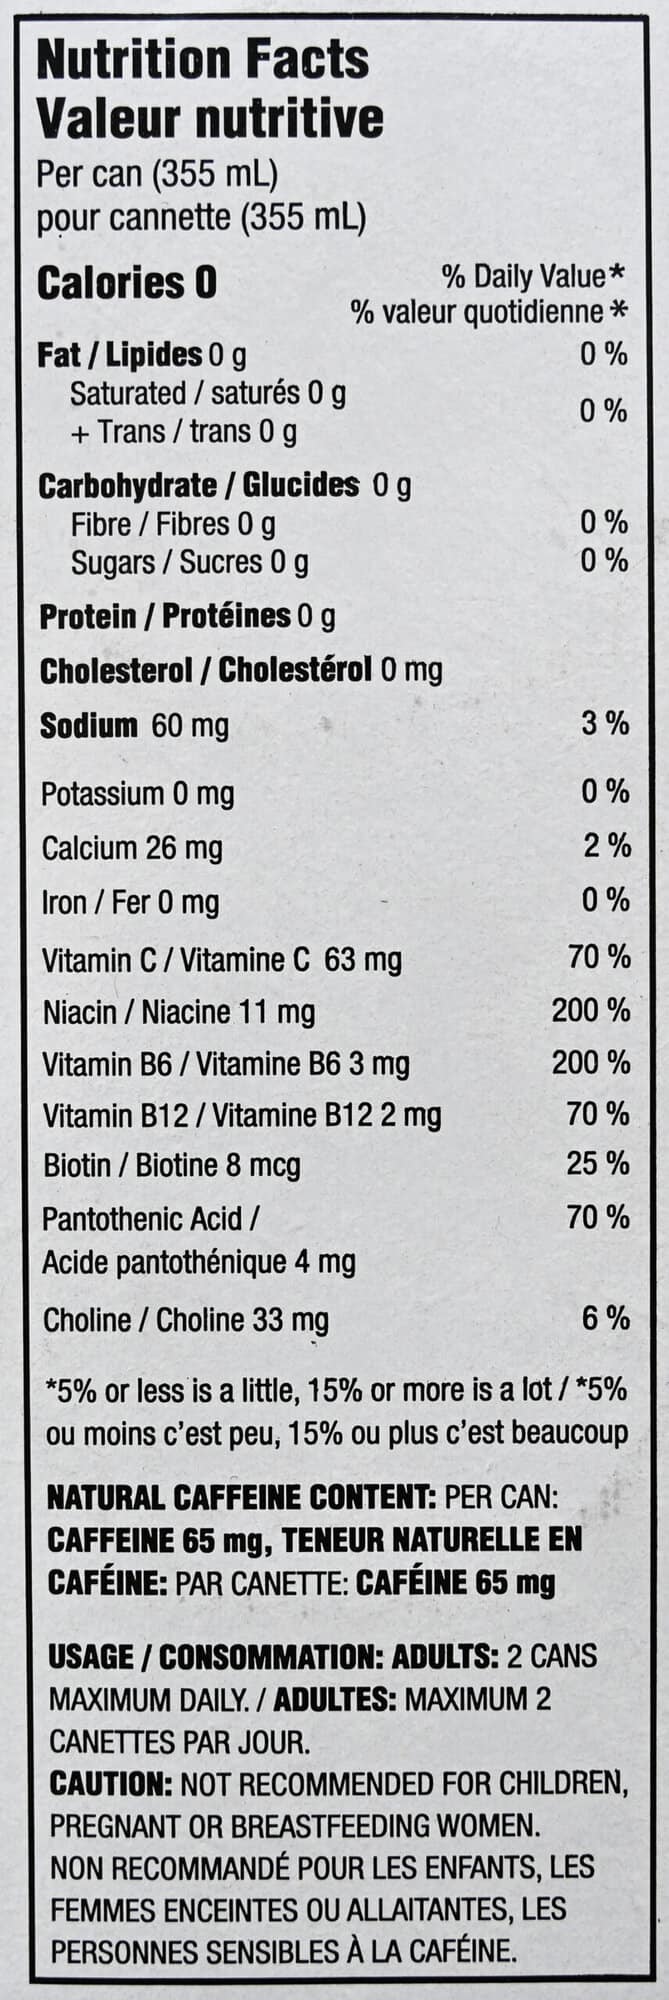 Image of the Aspire nutrition facts label from the box.